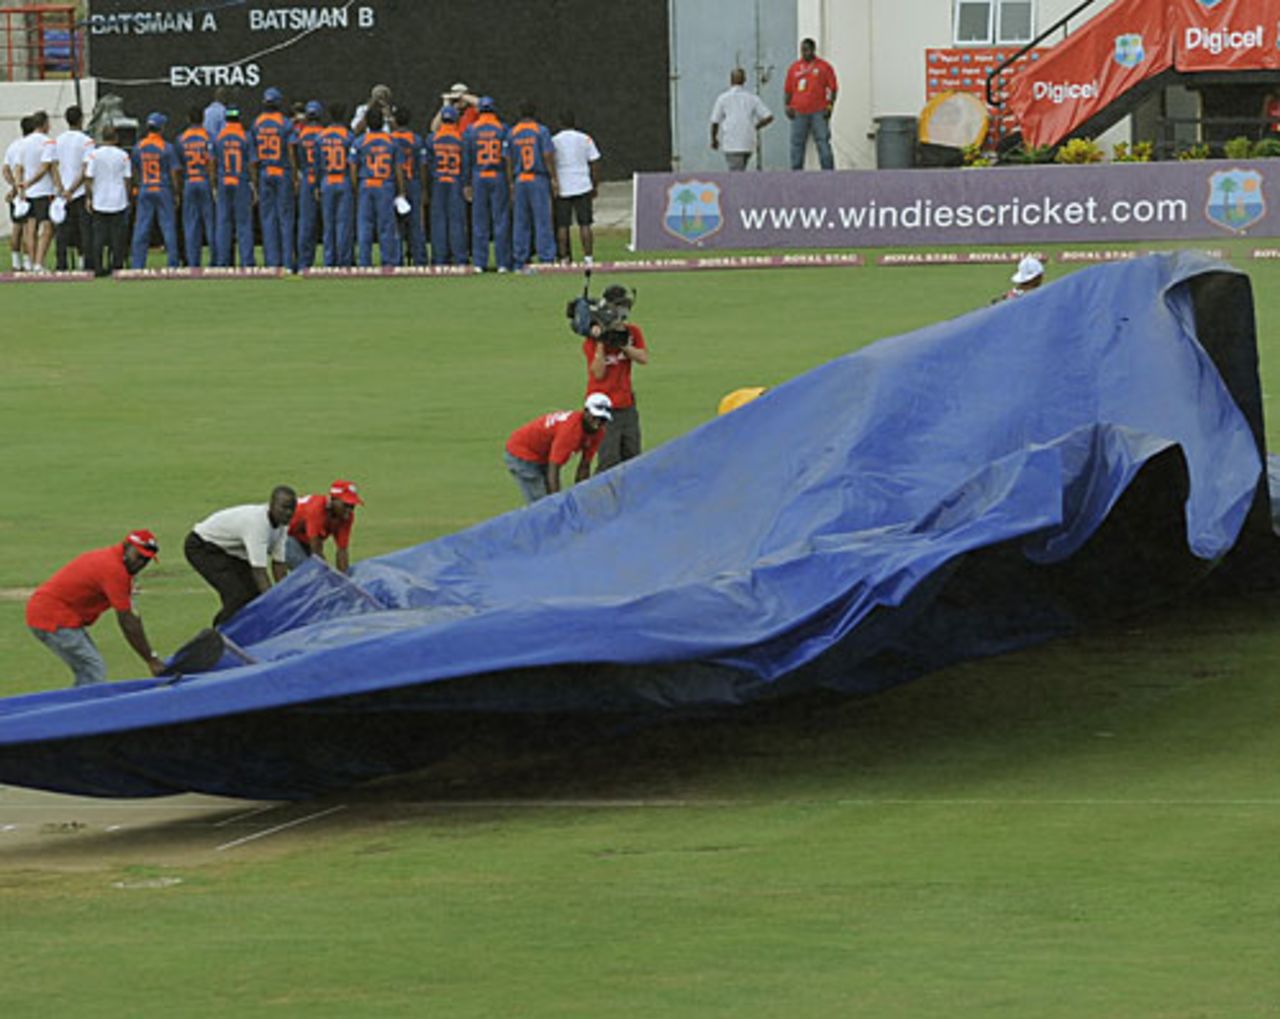 Groundsmen put the covers on the pitch, West Indies v India, 3rd ODI, St Lucia, July 3, 2009